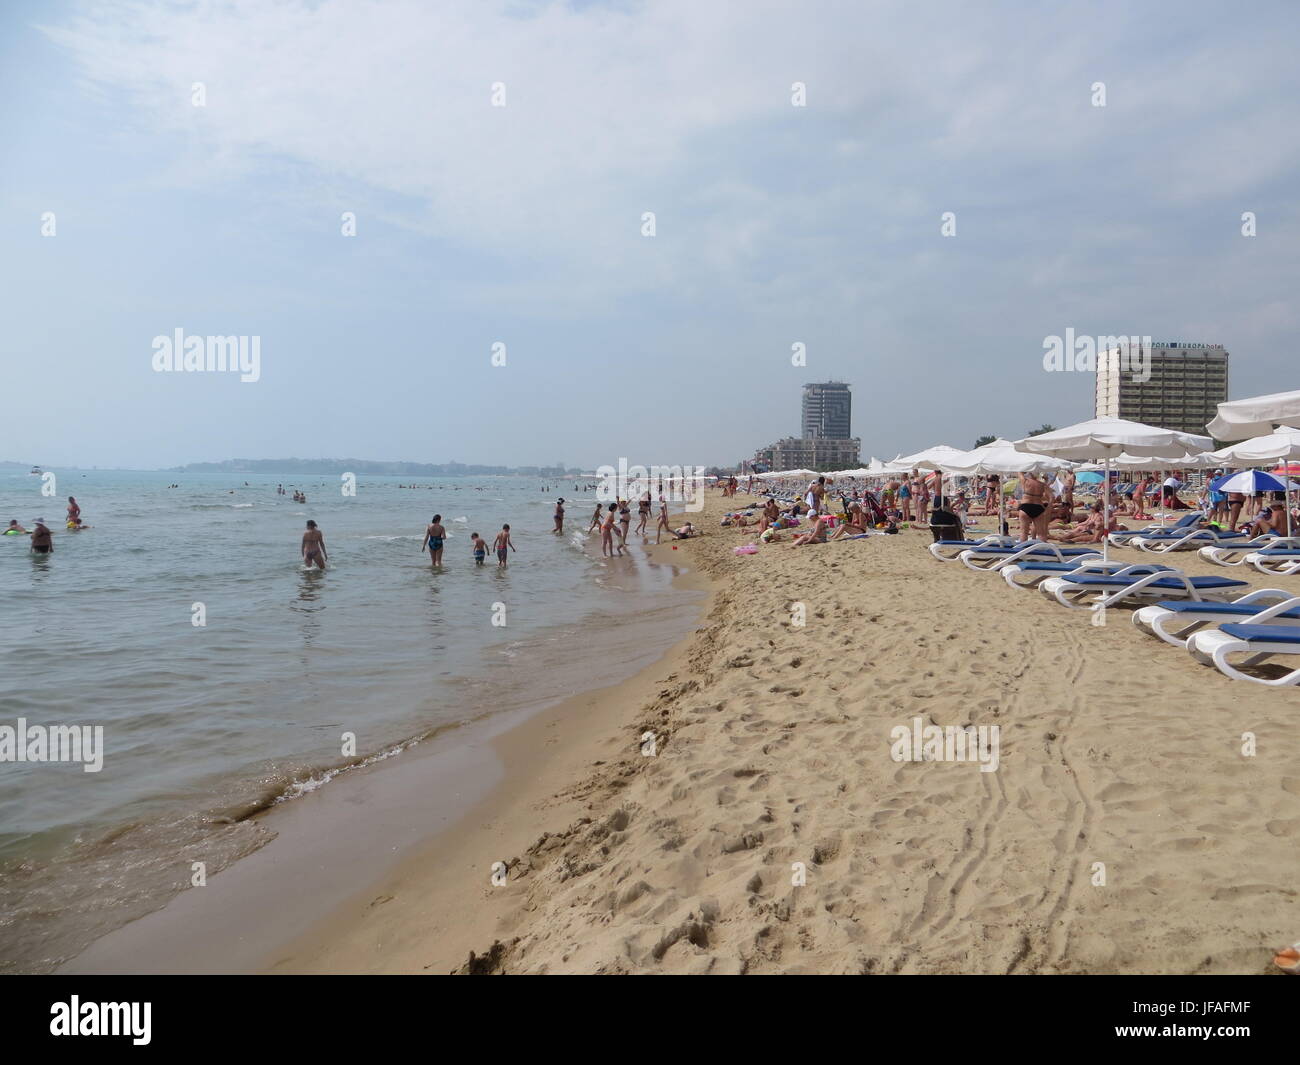 Sunny Beach, Bulgaria. 22nd June, 2017. View of the beach in Sunny Beach,  Bulgaria, 22 June 2017. Great beeches, fully booked hotels, long parties:  Bulgaria's party tourism is booming. Tourists feel safe,